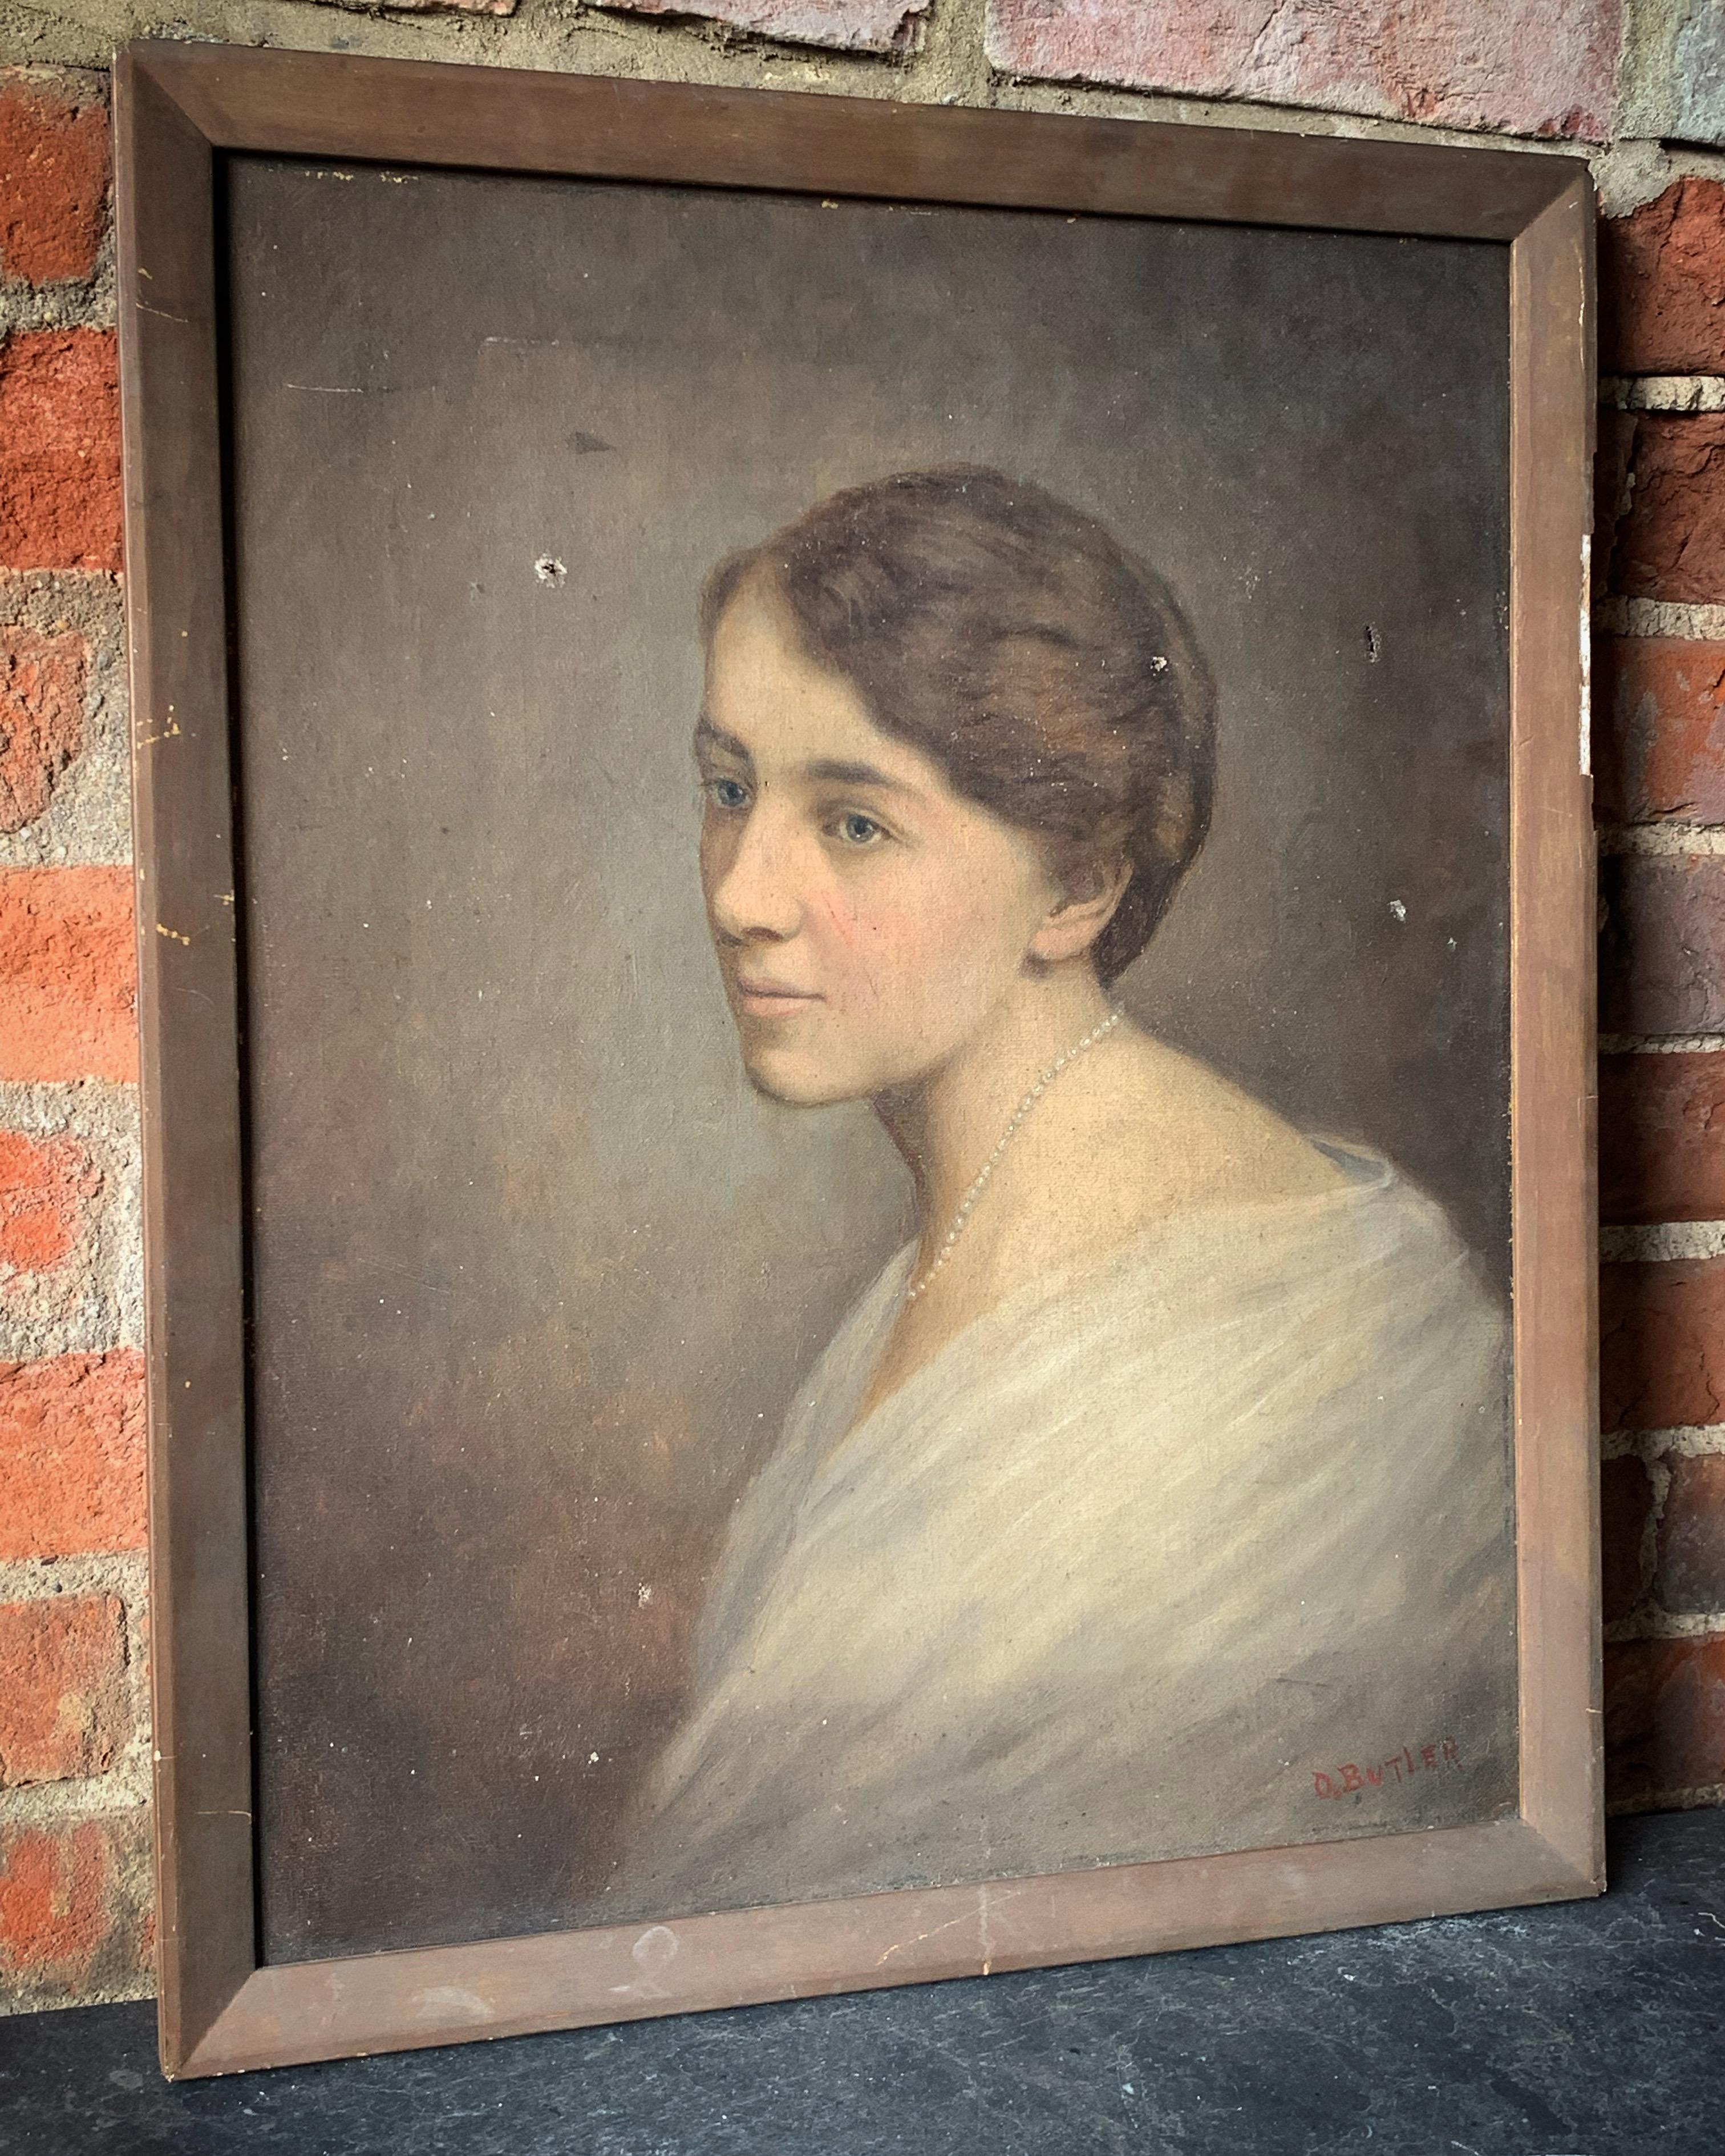 A charming antique oil on canvas portrait painting of a young woman. Circa 1900.
Please contact us for a worldwide shipping quote.